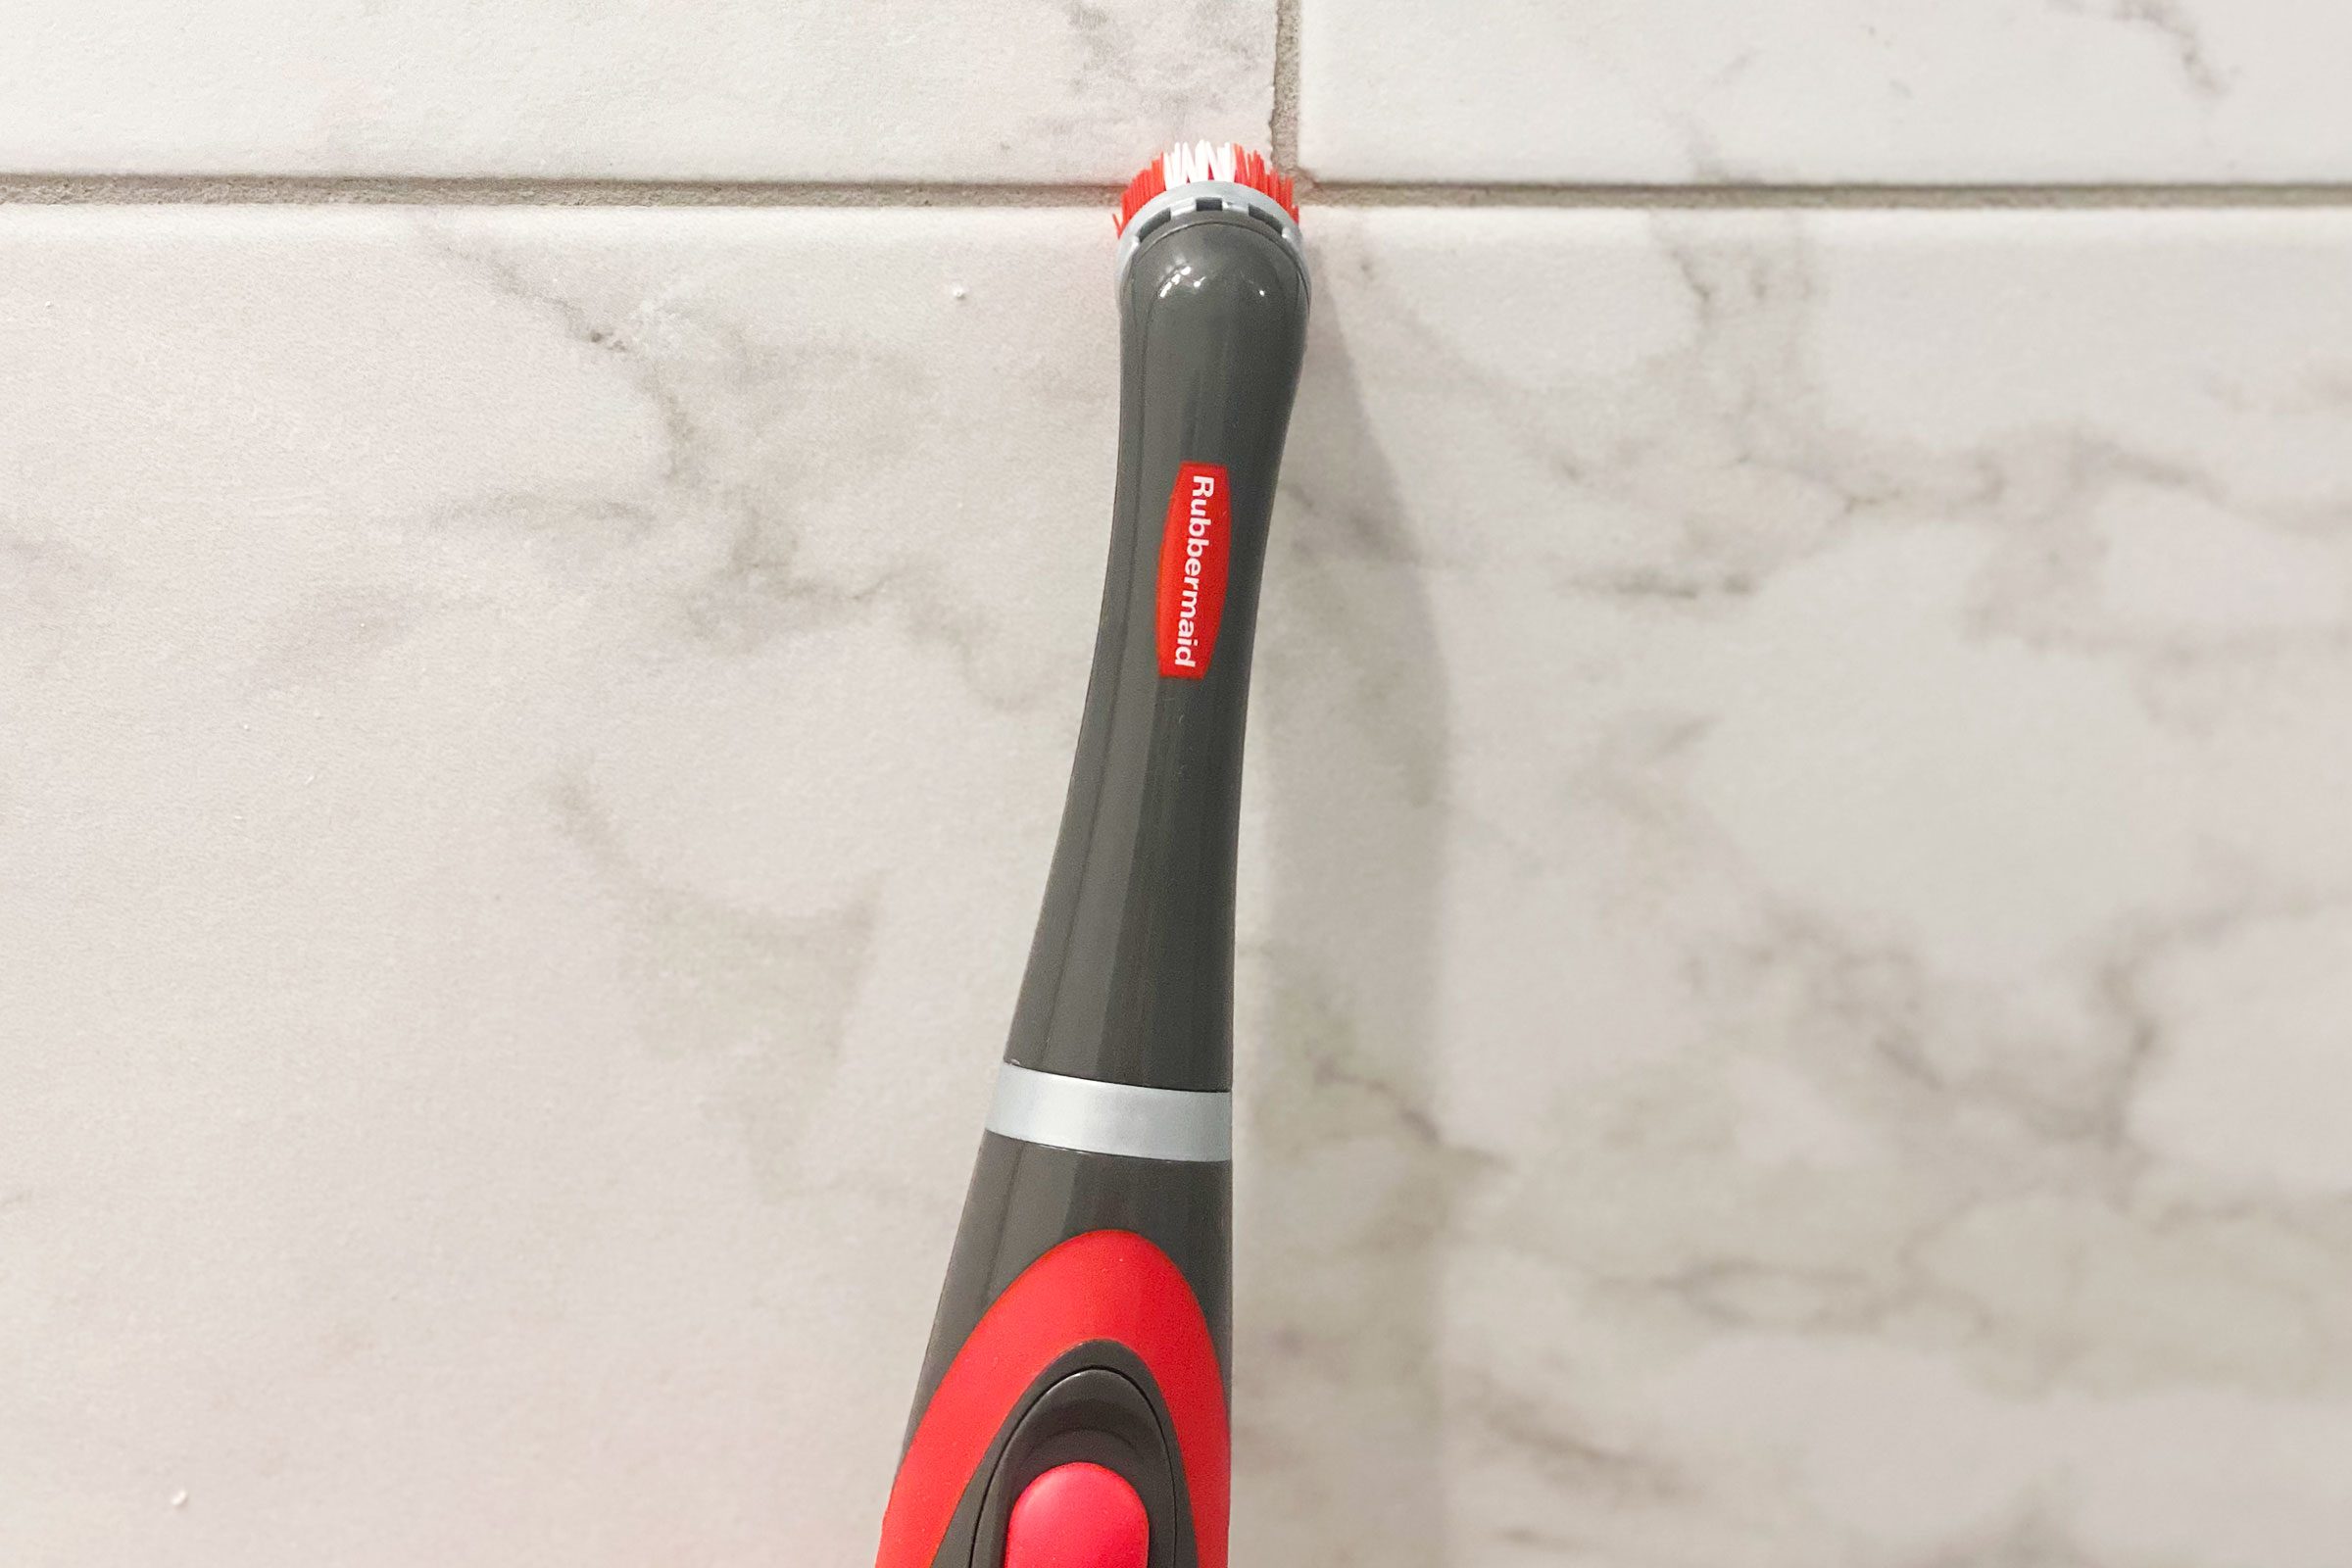 RUBBERMAID REVEAL POWER SCRUBBER REVIEW  CLEANING TILE GROUT WITH THE  SCRUBBER USING 3 METHODS 